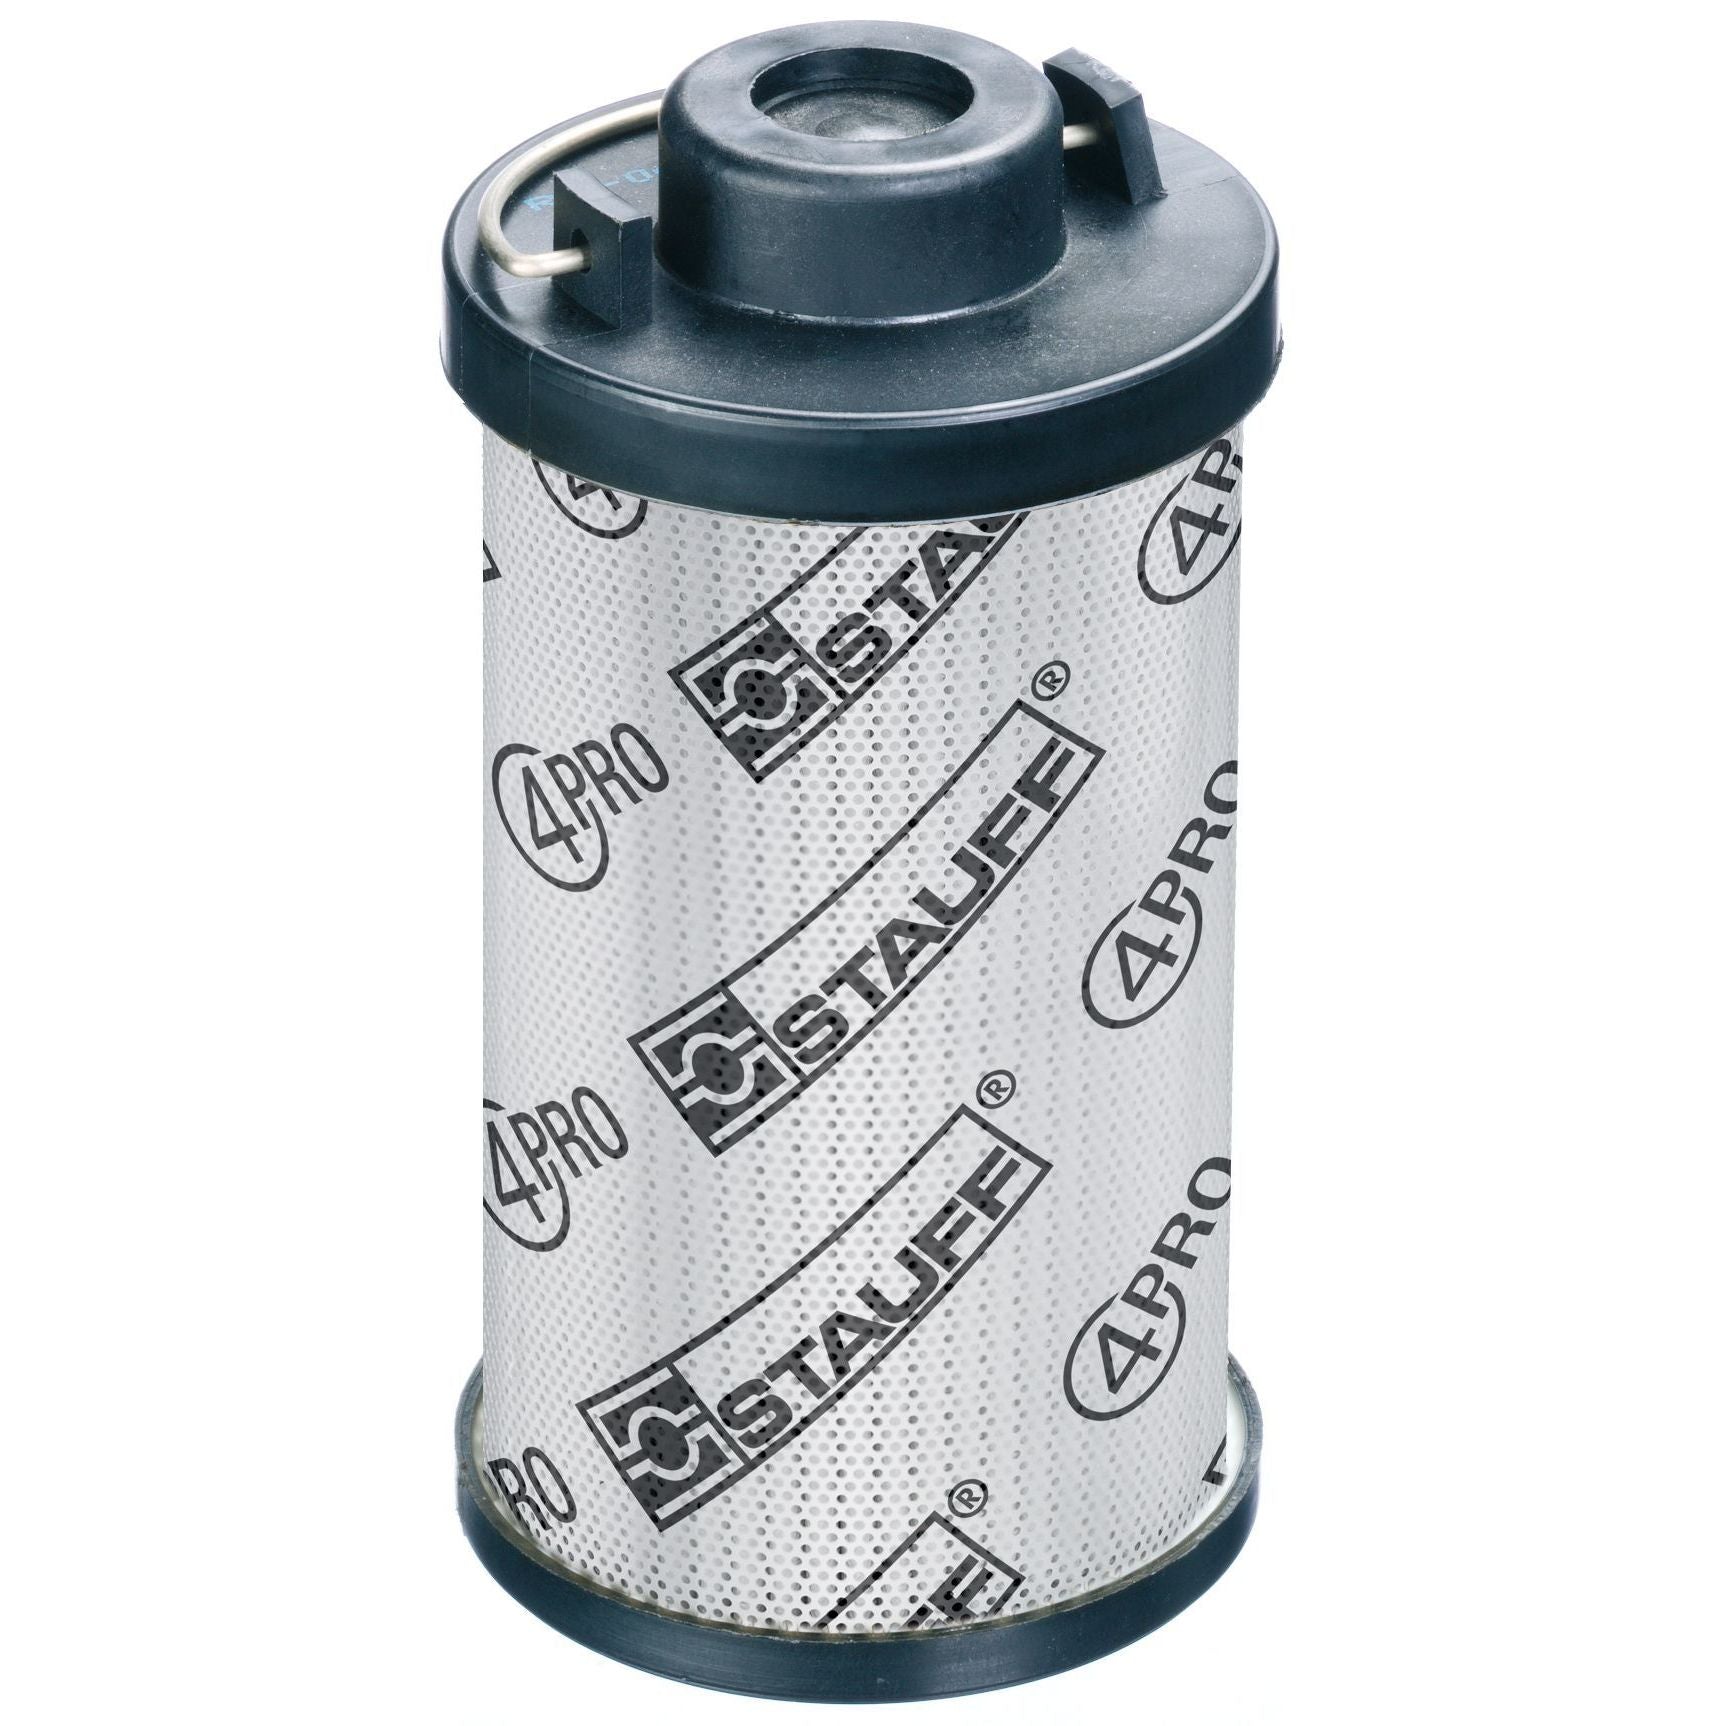 RE-045-G-10-V/4 : Stauff RF-045 Series Filter Element, 10 Micron, Synthetic, 363psi Collapse Differential, Viton Seals